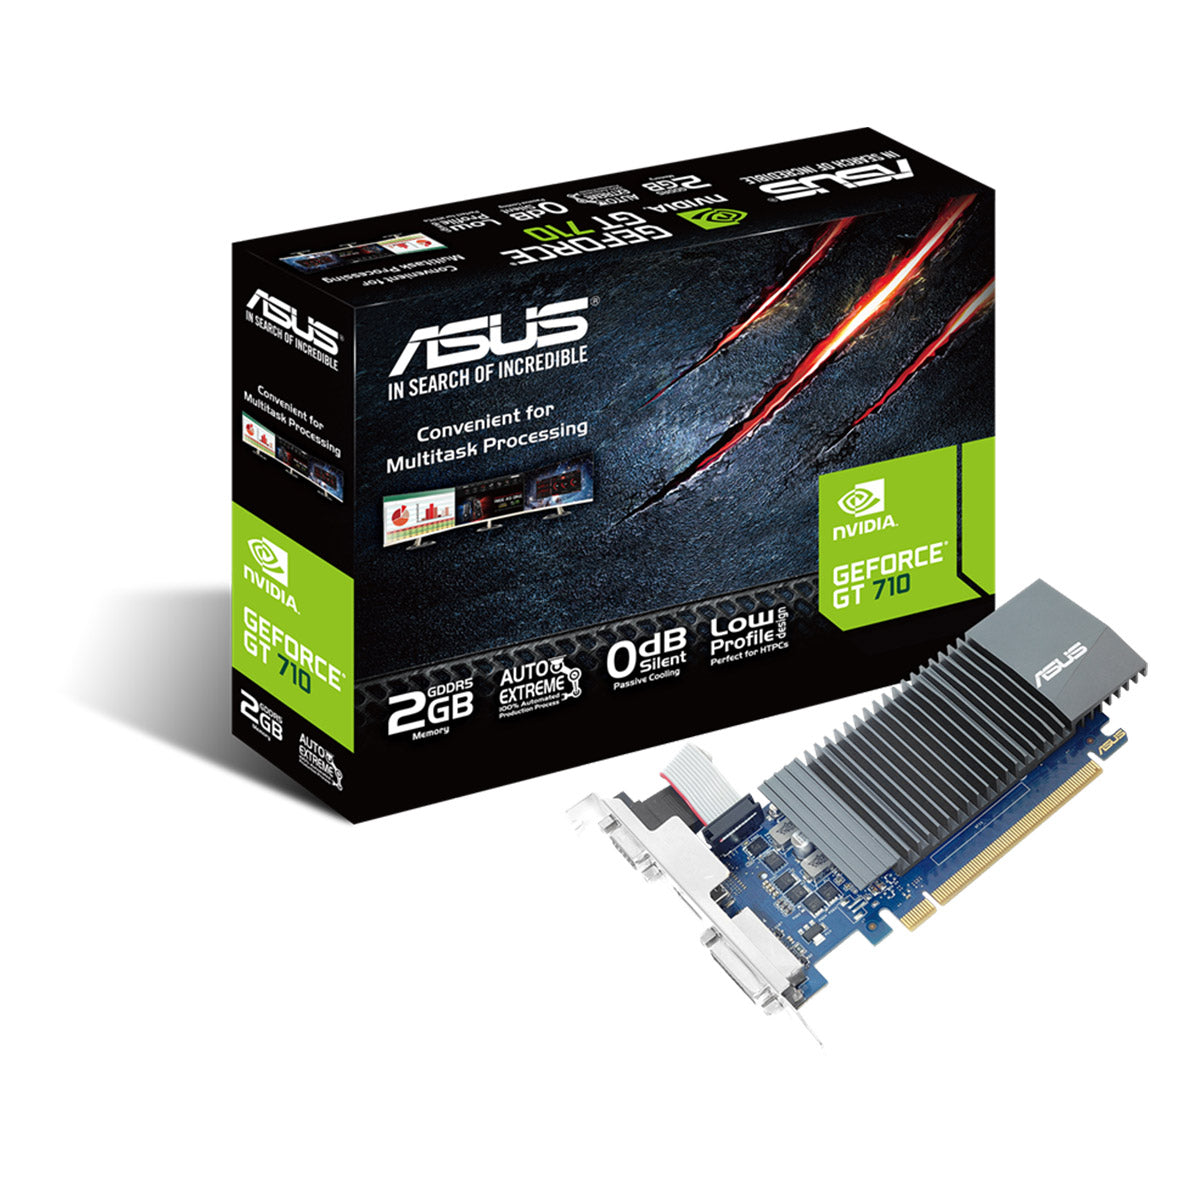 ASUS GeForce GT 710 2GB GDDR5 64-Bit Graphics Card with 0db efficient cooling